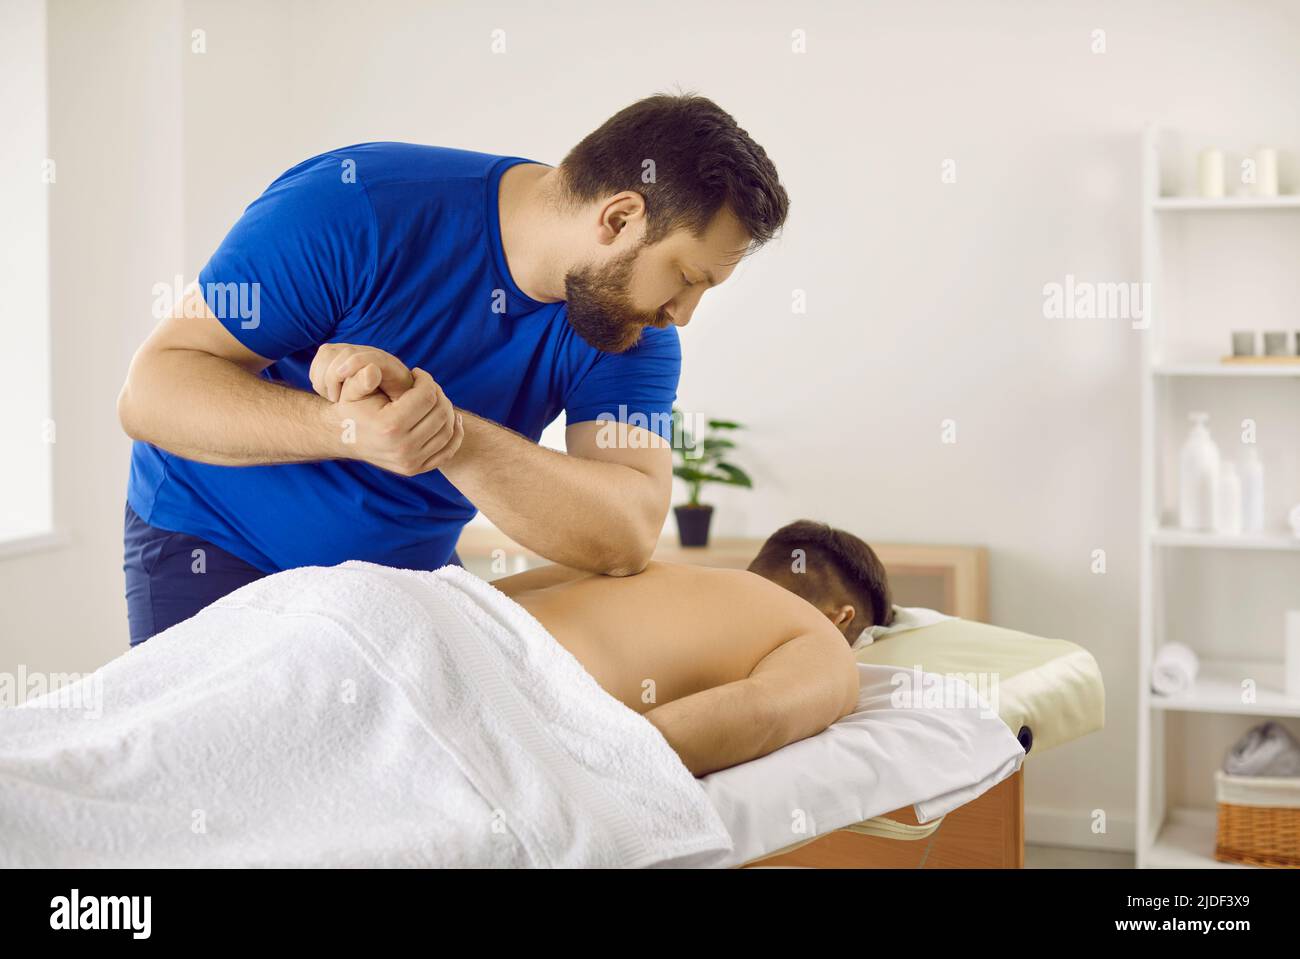 Professional male masseur presses his elbow on patient's back during massage session. Stock Photo